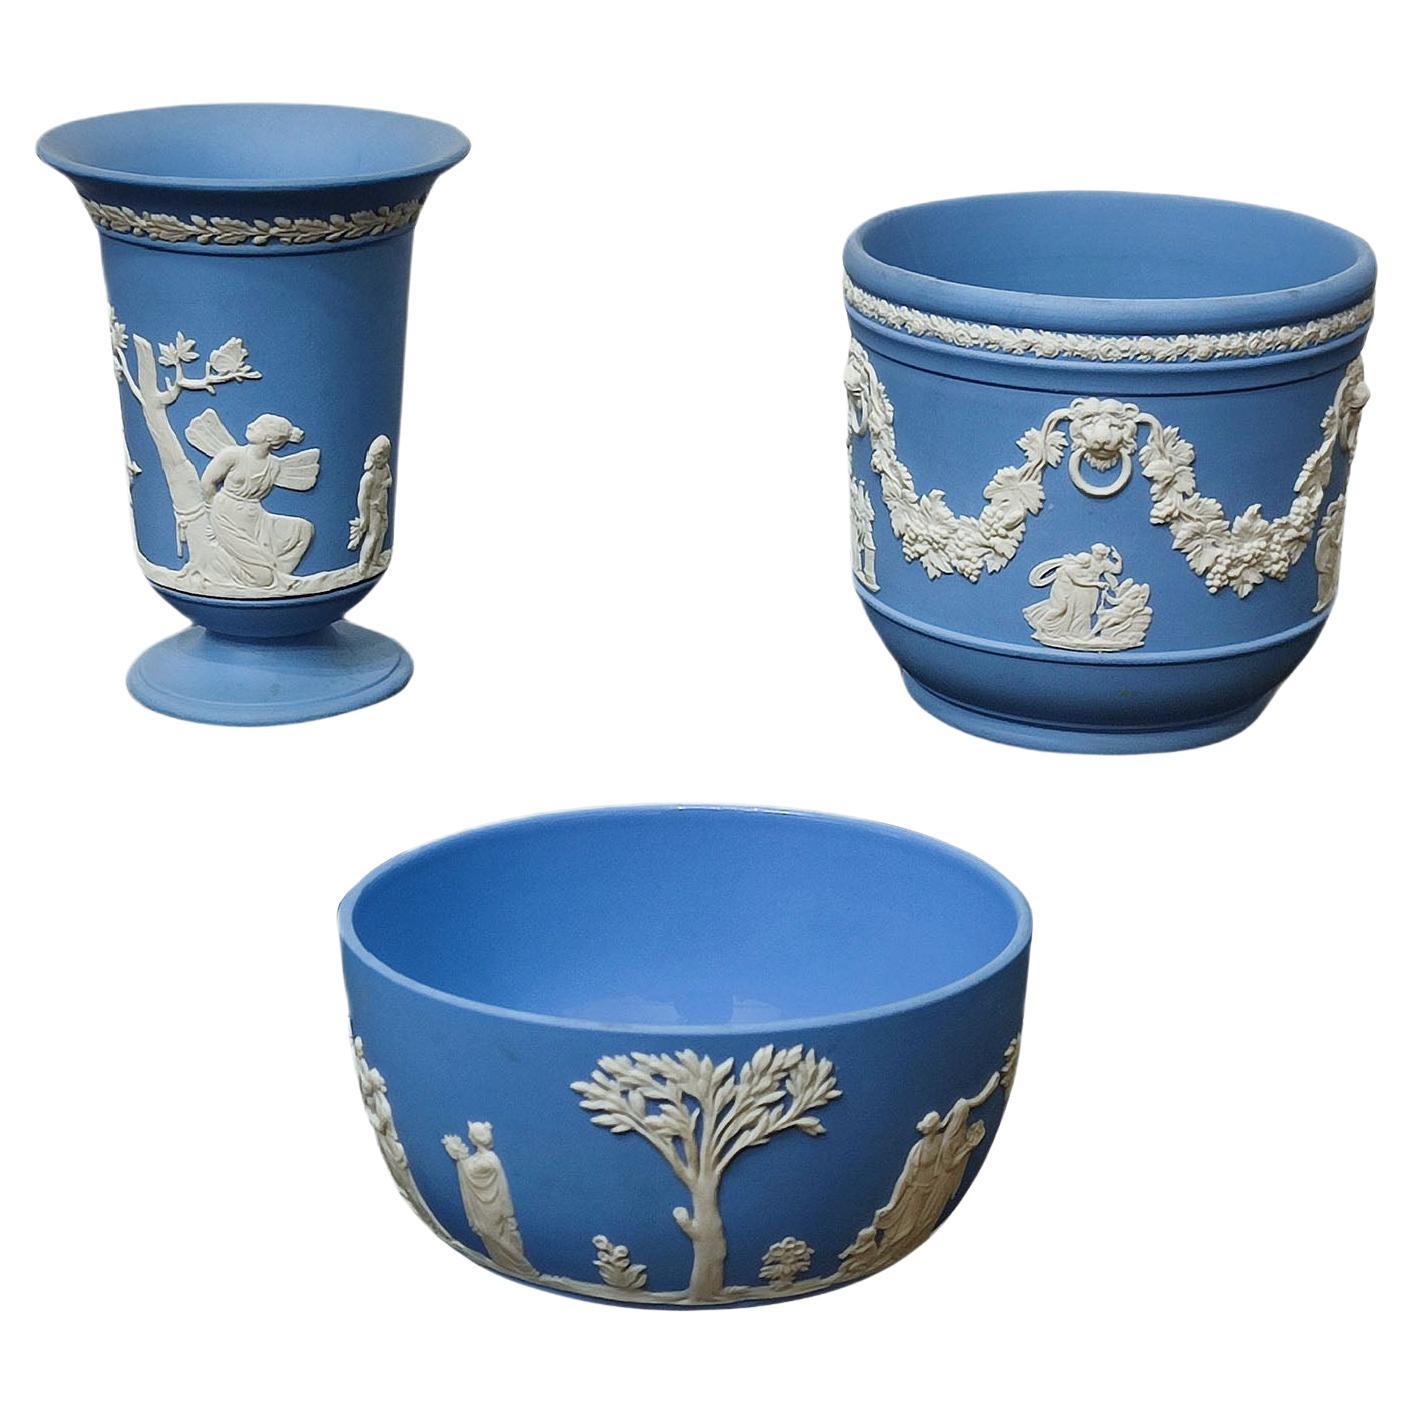 Wedgwood Blue Jasper Ware Vessels Classical Scenes, Collection of 3, FREESHIP